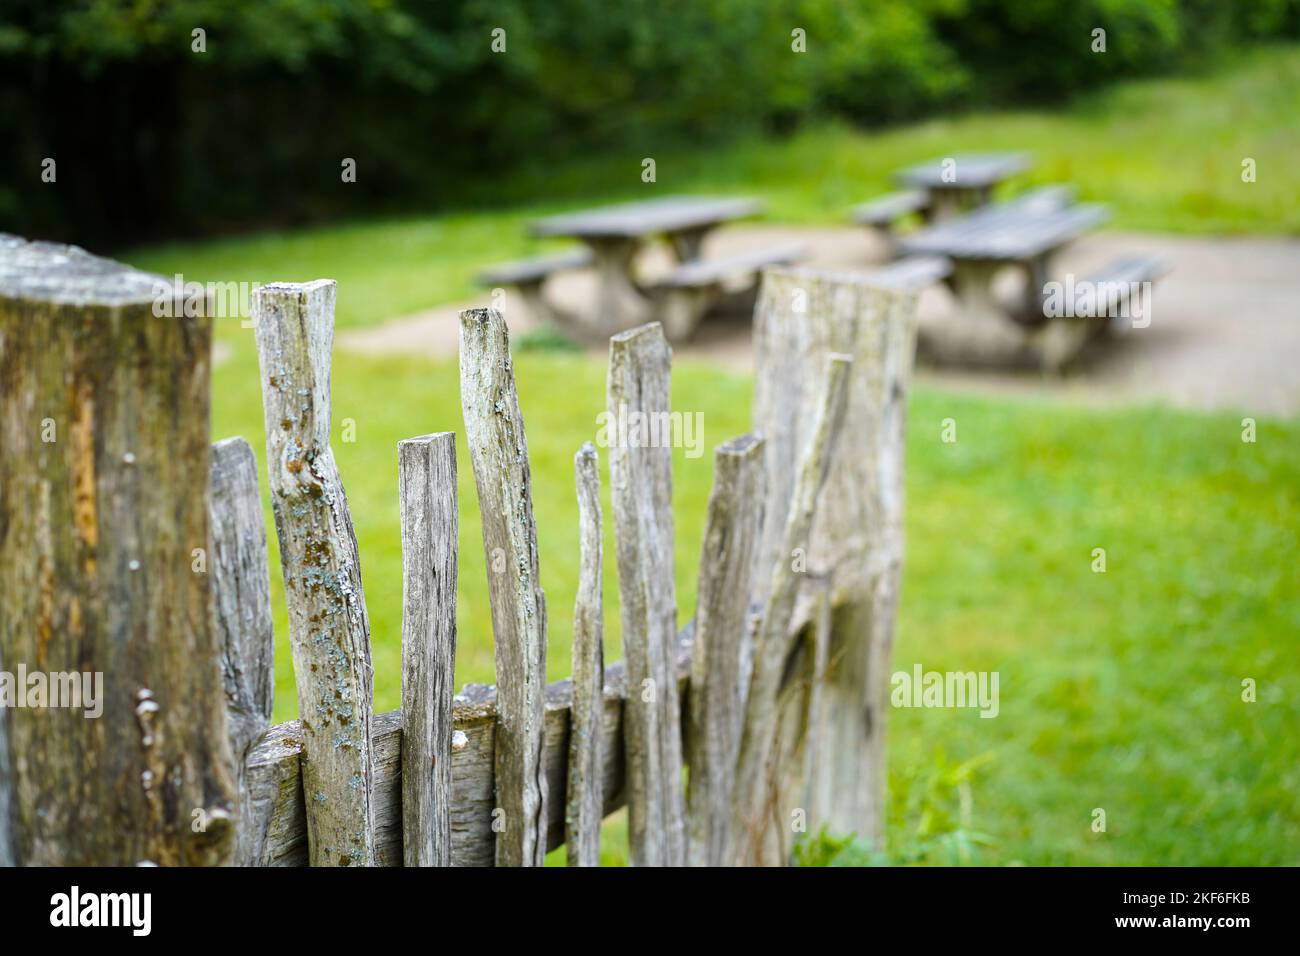 Close up of rustic, handmade wooden picket fence in UK country park leading to empty picnic benches. Stock Photo